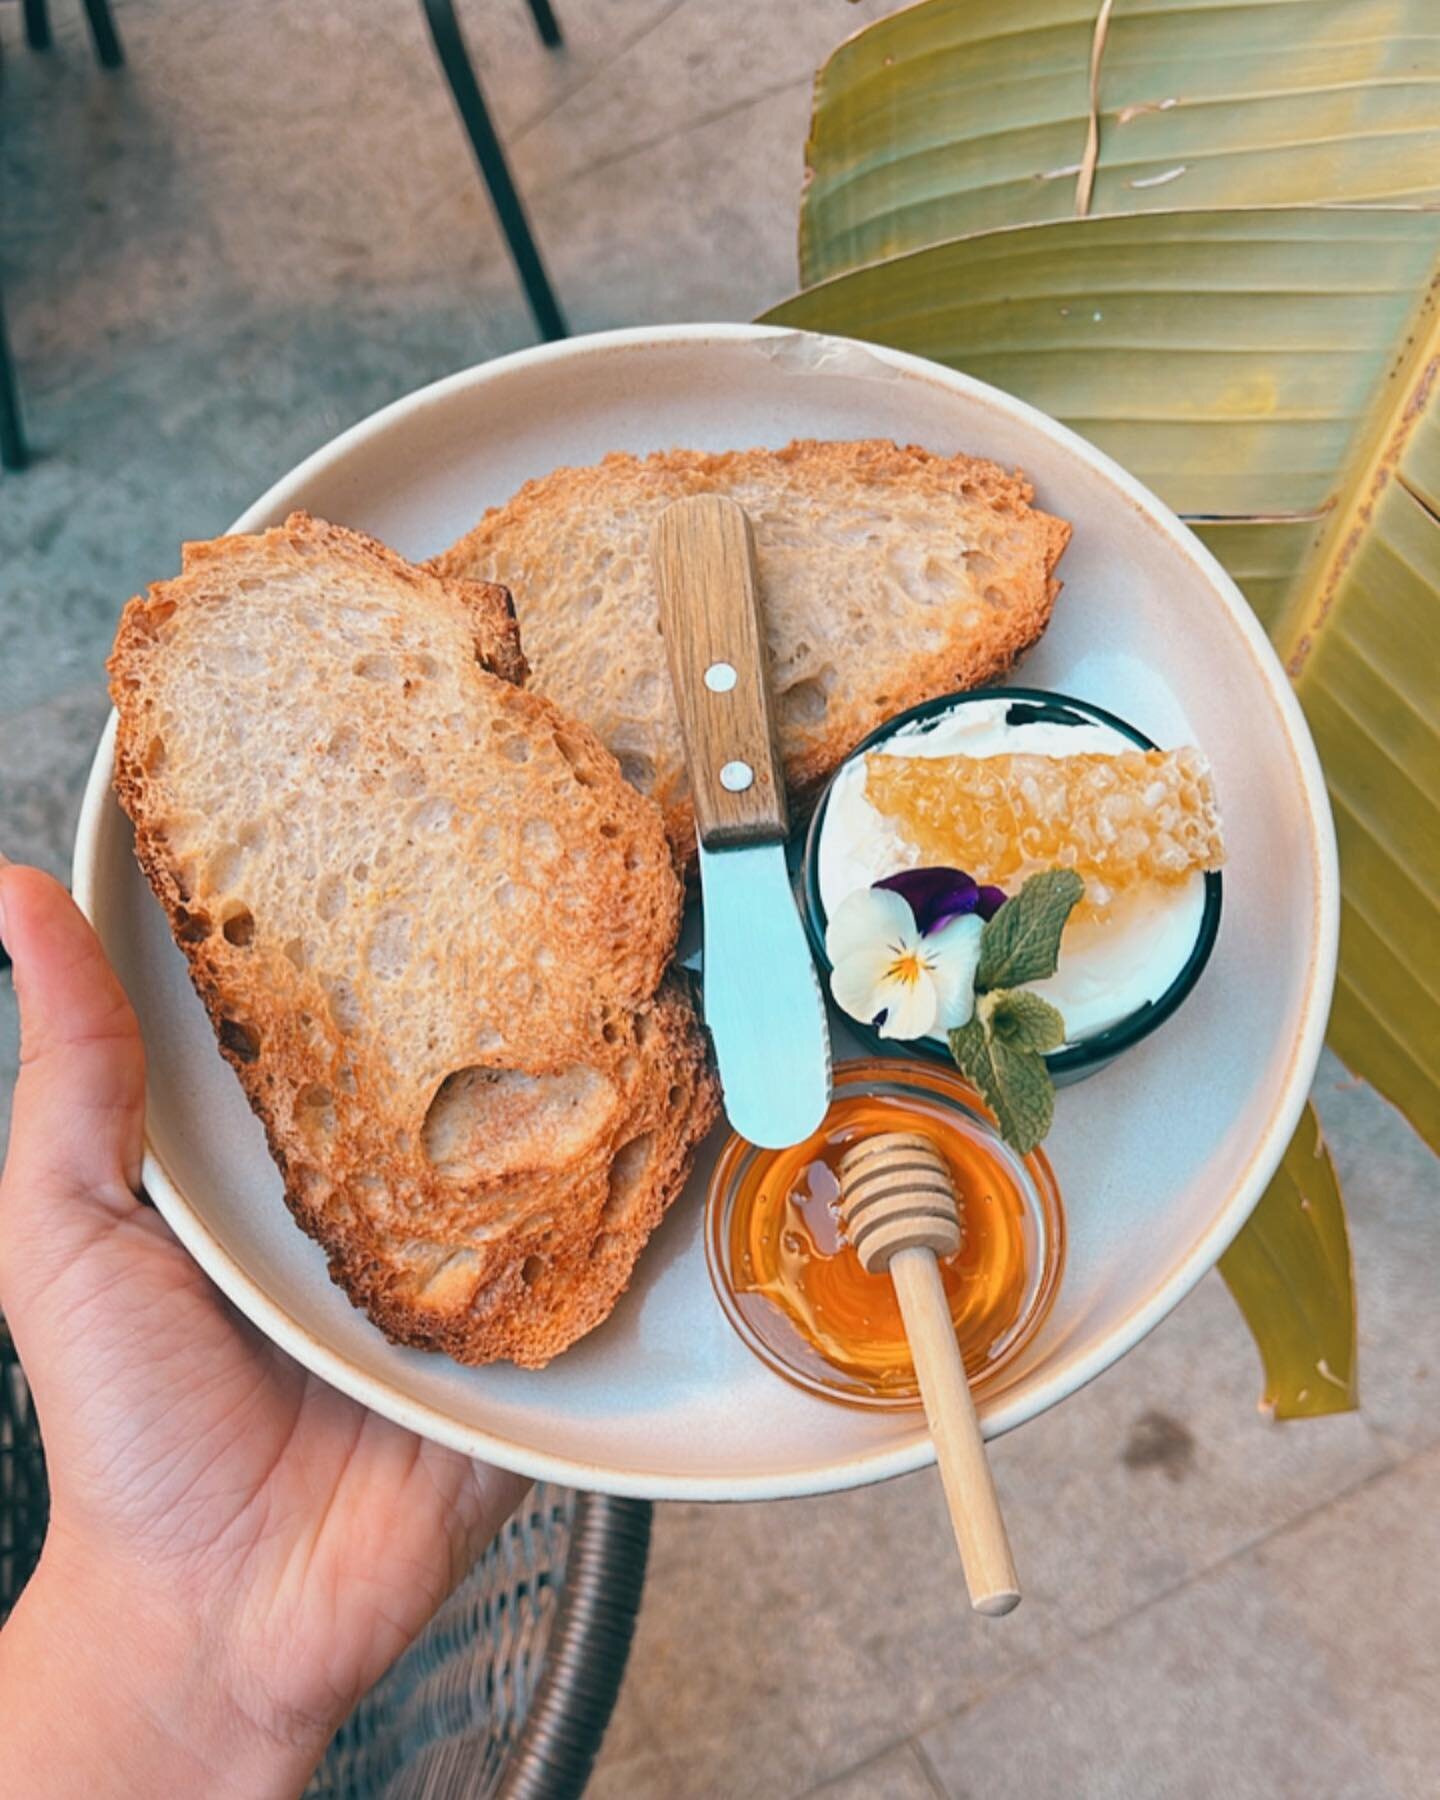 Our Bee Keeper Toast 🐝 

Two slices of toasted sourdough bread, mascarpone, a nice chunk of honey comb and some to drizzle on the side. Smooth, sweet, and here to stay 🤤
.
.
.

#lafabrica #lafabricagirona #girona #gironamenamora #thirdwavecoffee #c